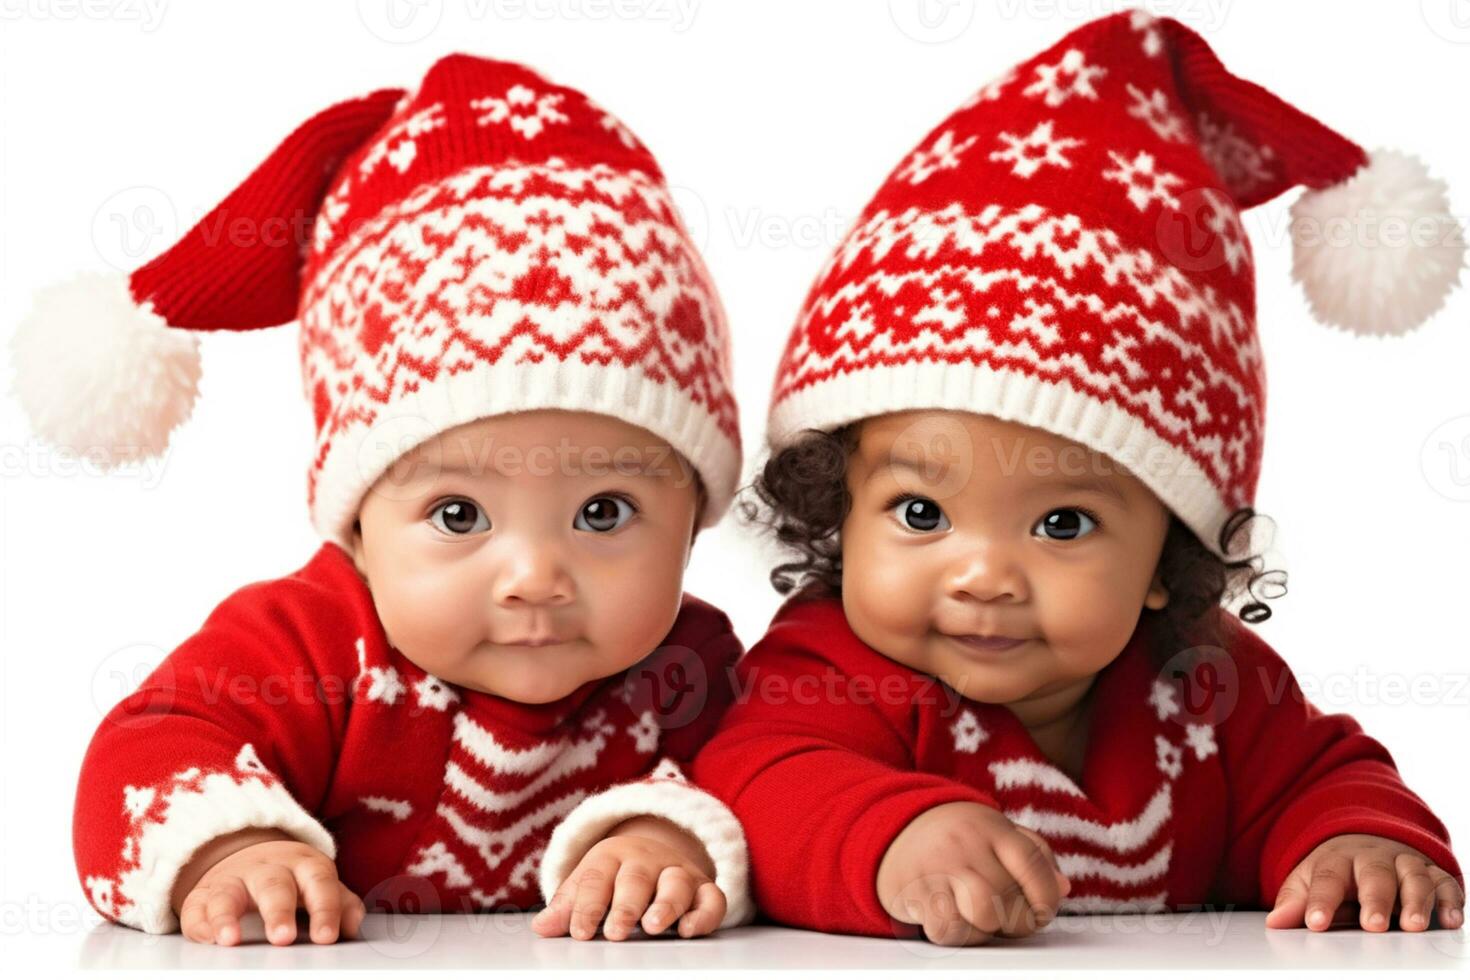 potrait of cute diverse babies on a Christmas themed outfit photo